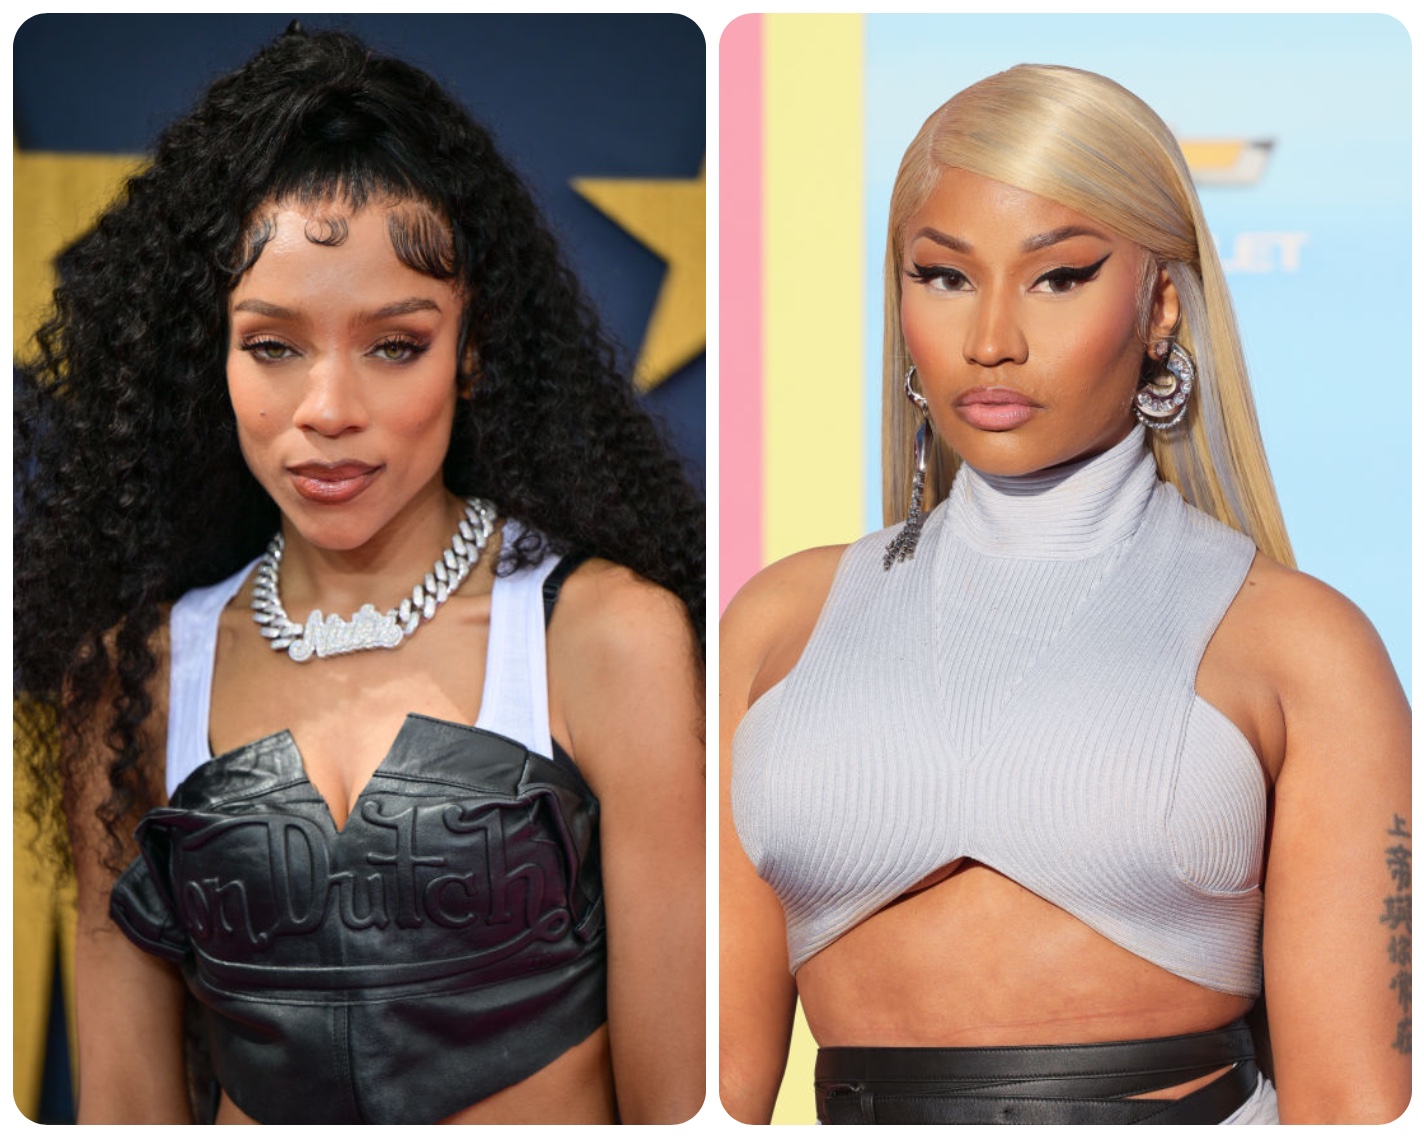 Lil Mama Makes Messy ‘Musical Prostitute’ Comment About Nicki Minaj, Barbz Berate Her With ‘Jealousy’ Jabs